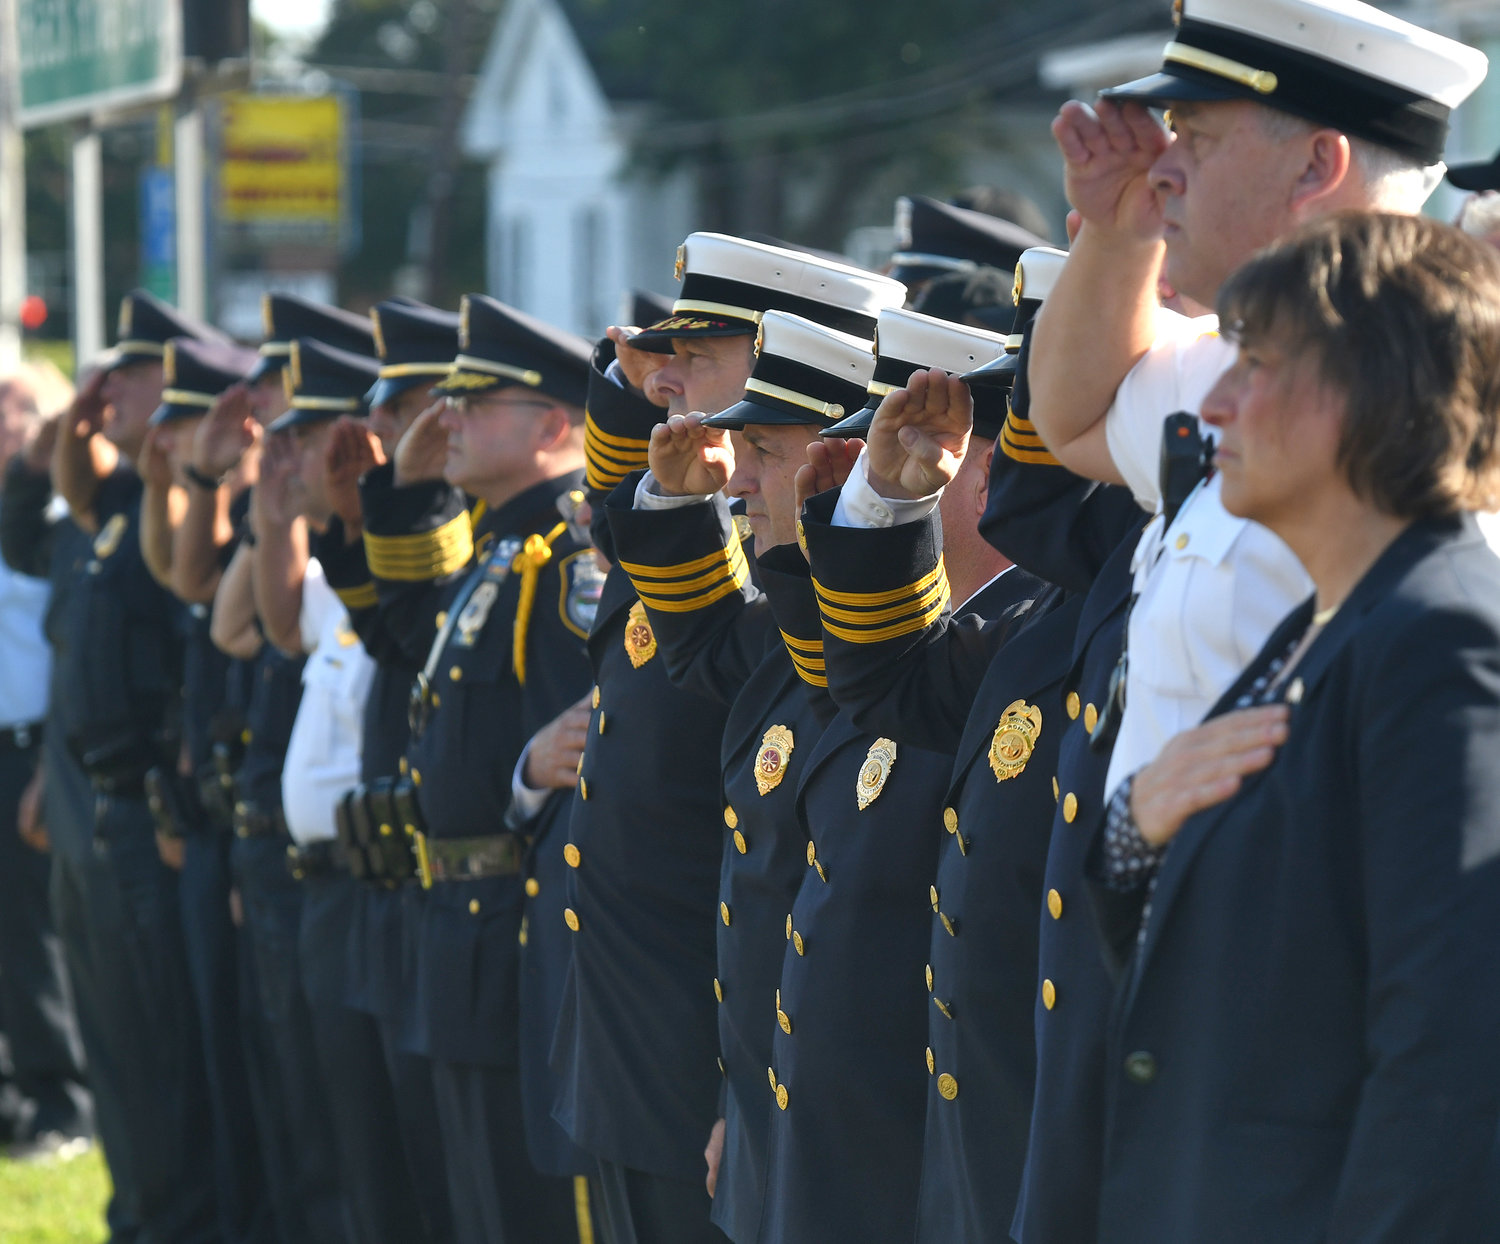 SALUTE — Members of the Rome Fire Department and Rome Police Department, along with Mayor Jacqueline M. Izzo, salute during the national anthem at the 9/11 remembrance ceremony in Rome.